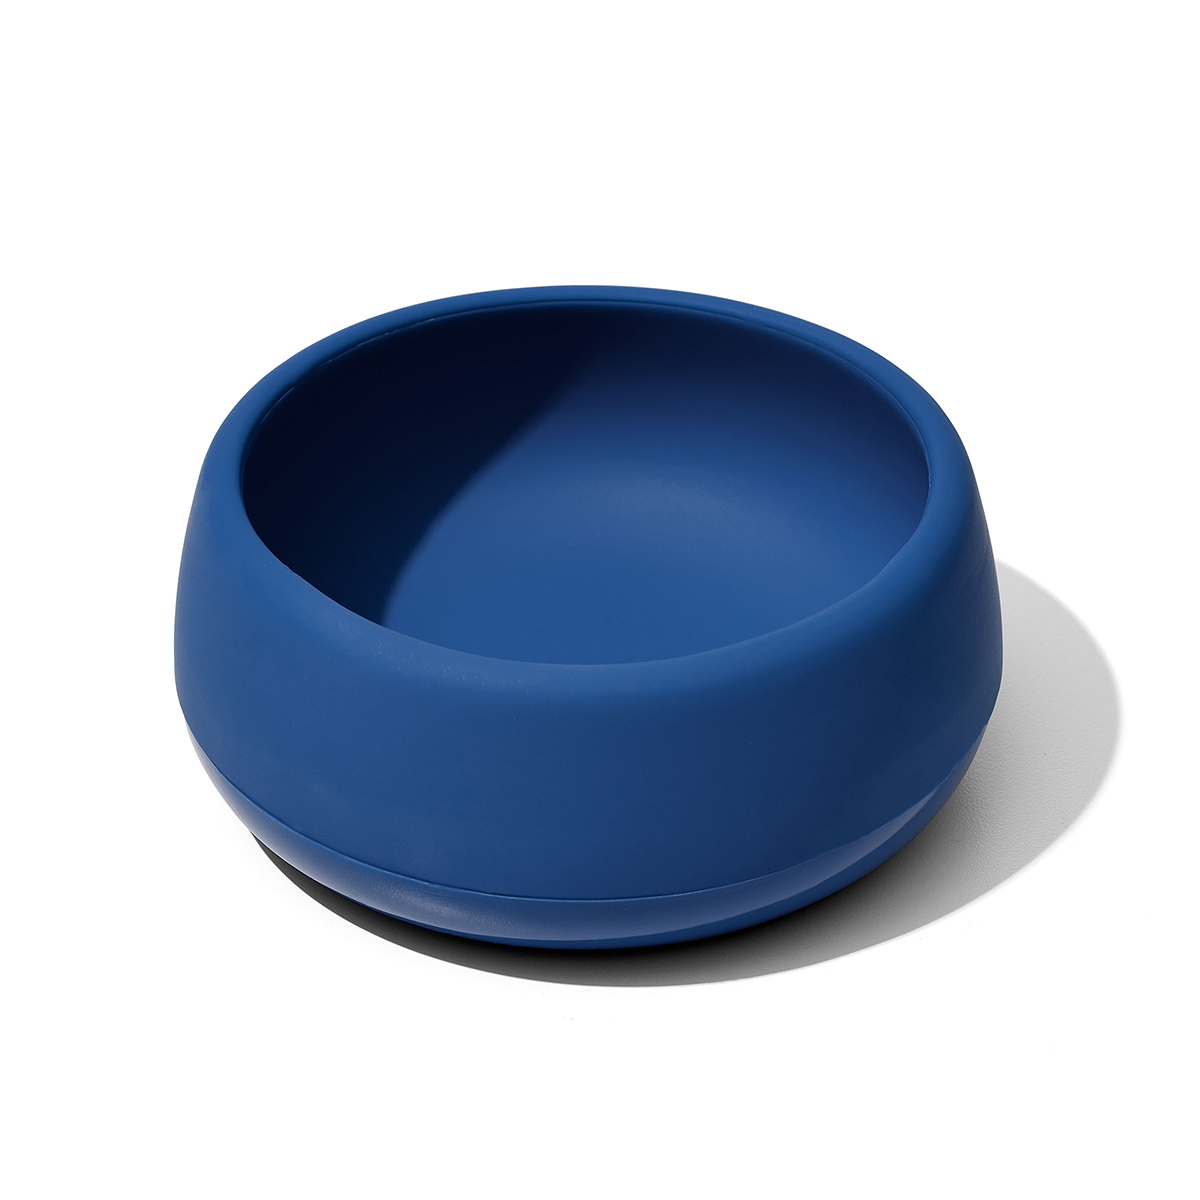 https://images.containerstore.com/catalogimages/405738/10083005%20TOT%20SILICONE%20BOWL%20NAVY%20IMAG.jpg